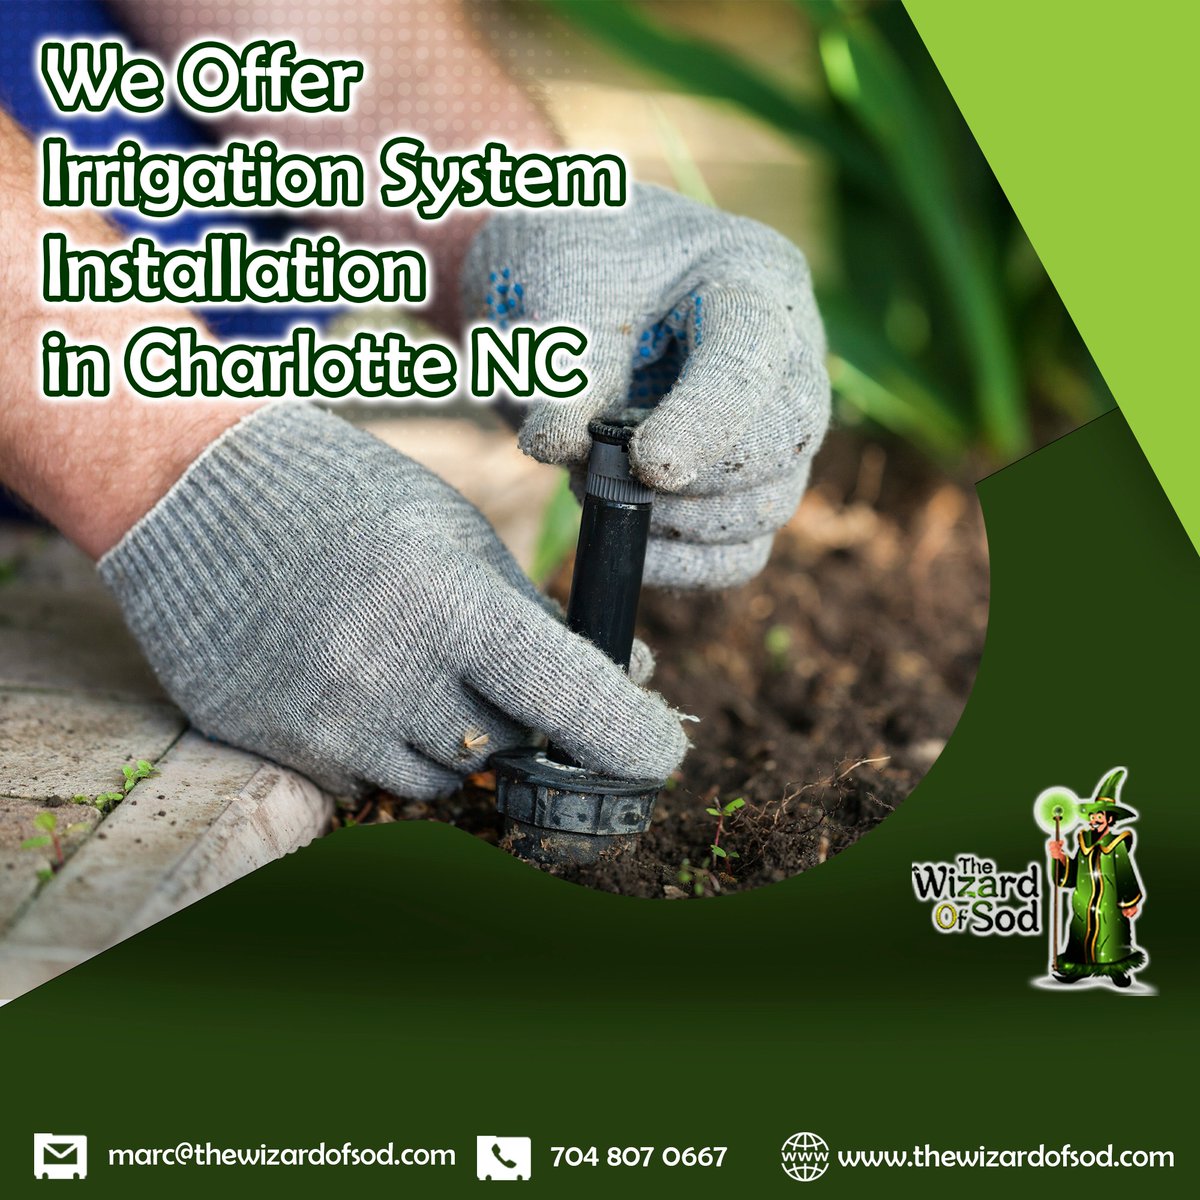 We Offer irrigation system installation in charlotte NC

Give us a call now at 𝟳𝟬𝟰 𝟴𝟬𝟳 𝟬𝟲𝟲𝟳

#IrrigationInstallation #IrrigationSystem #IrrigationSetup #LandscapeIrrigation #IrrigationInstallationExpert #LawnCare #GardenIrrigation #IrrigationDesign #OutdoorIrrigation